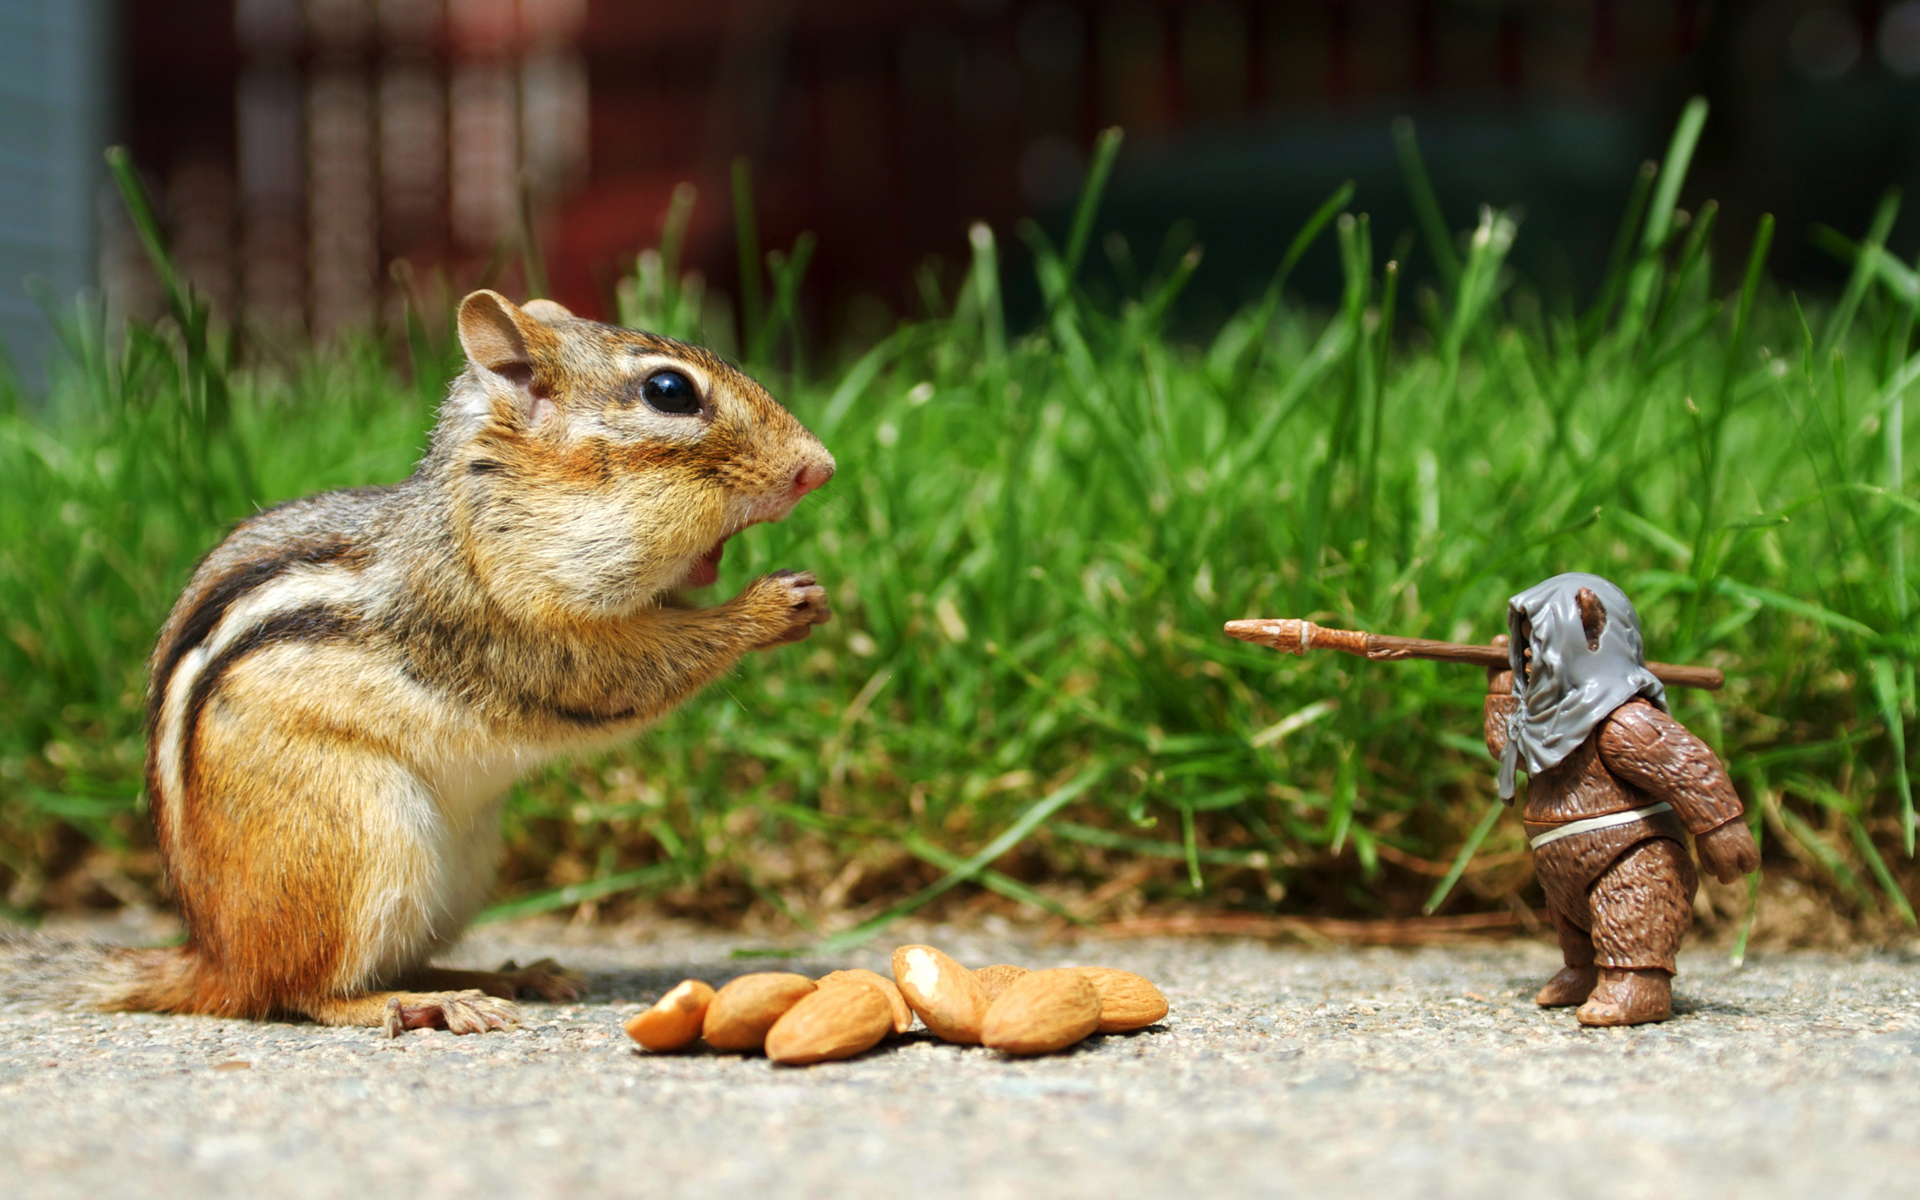 Ewok and chipmunk in vibrant HD wallpaper